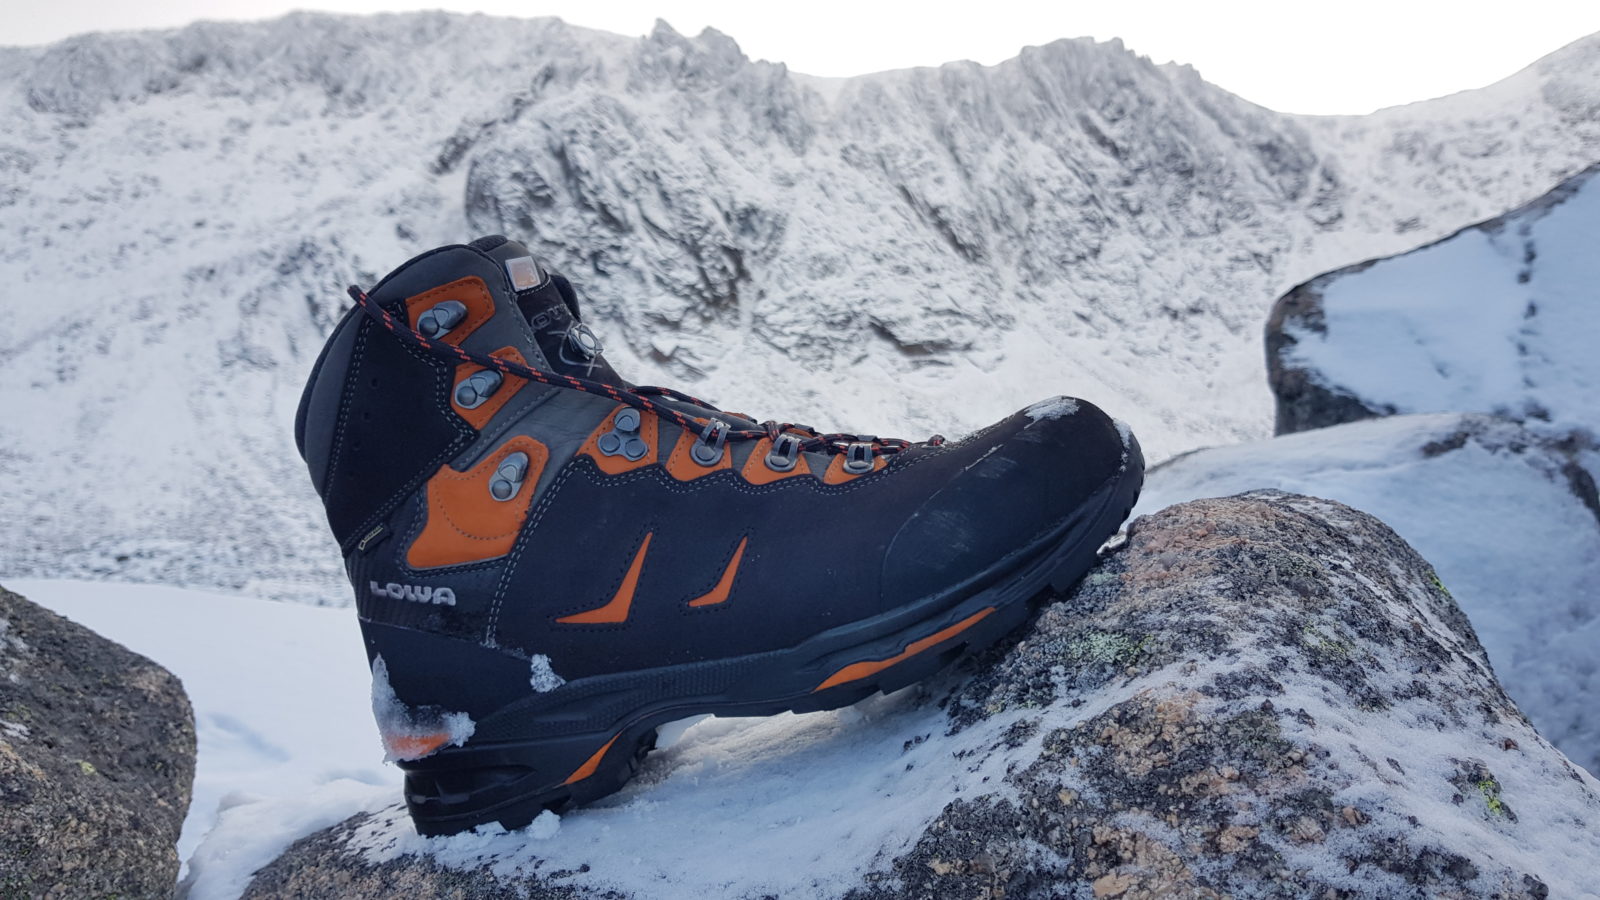 Lowa Camino GTX review - The Best 